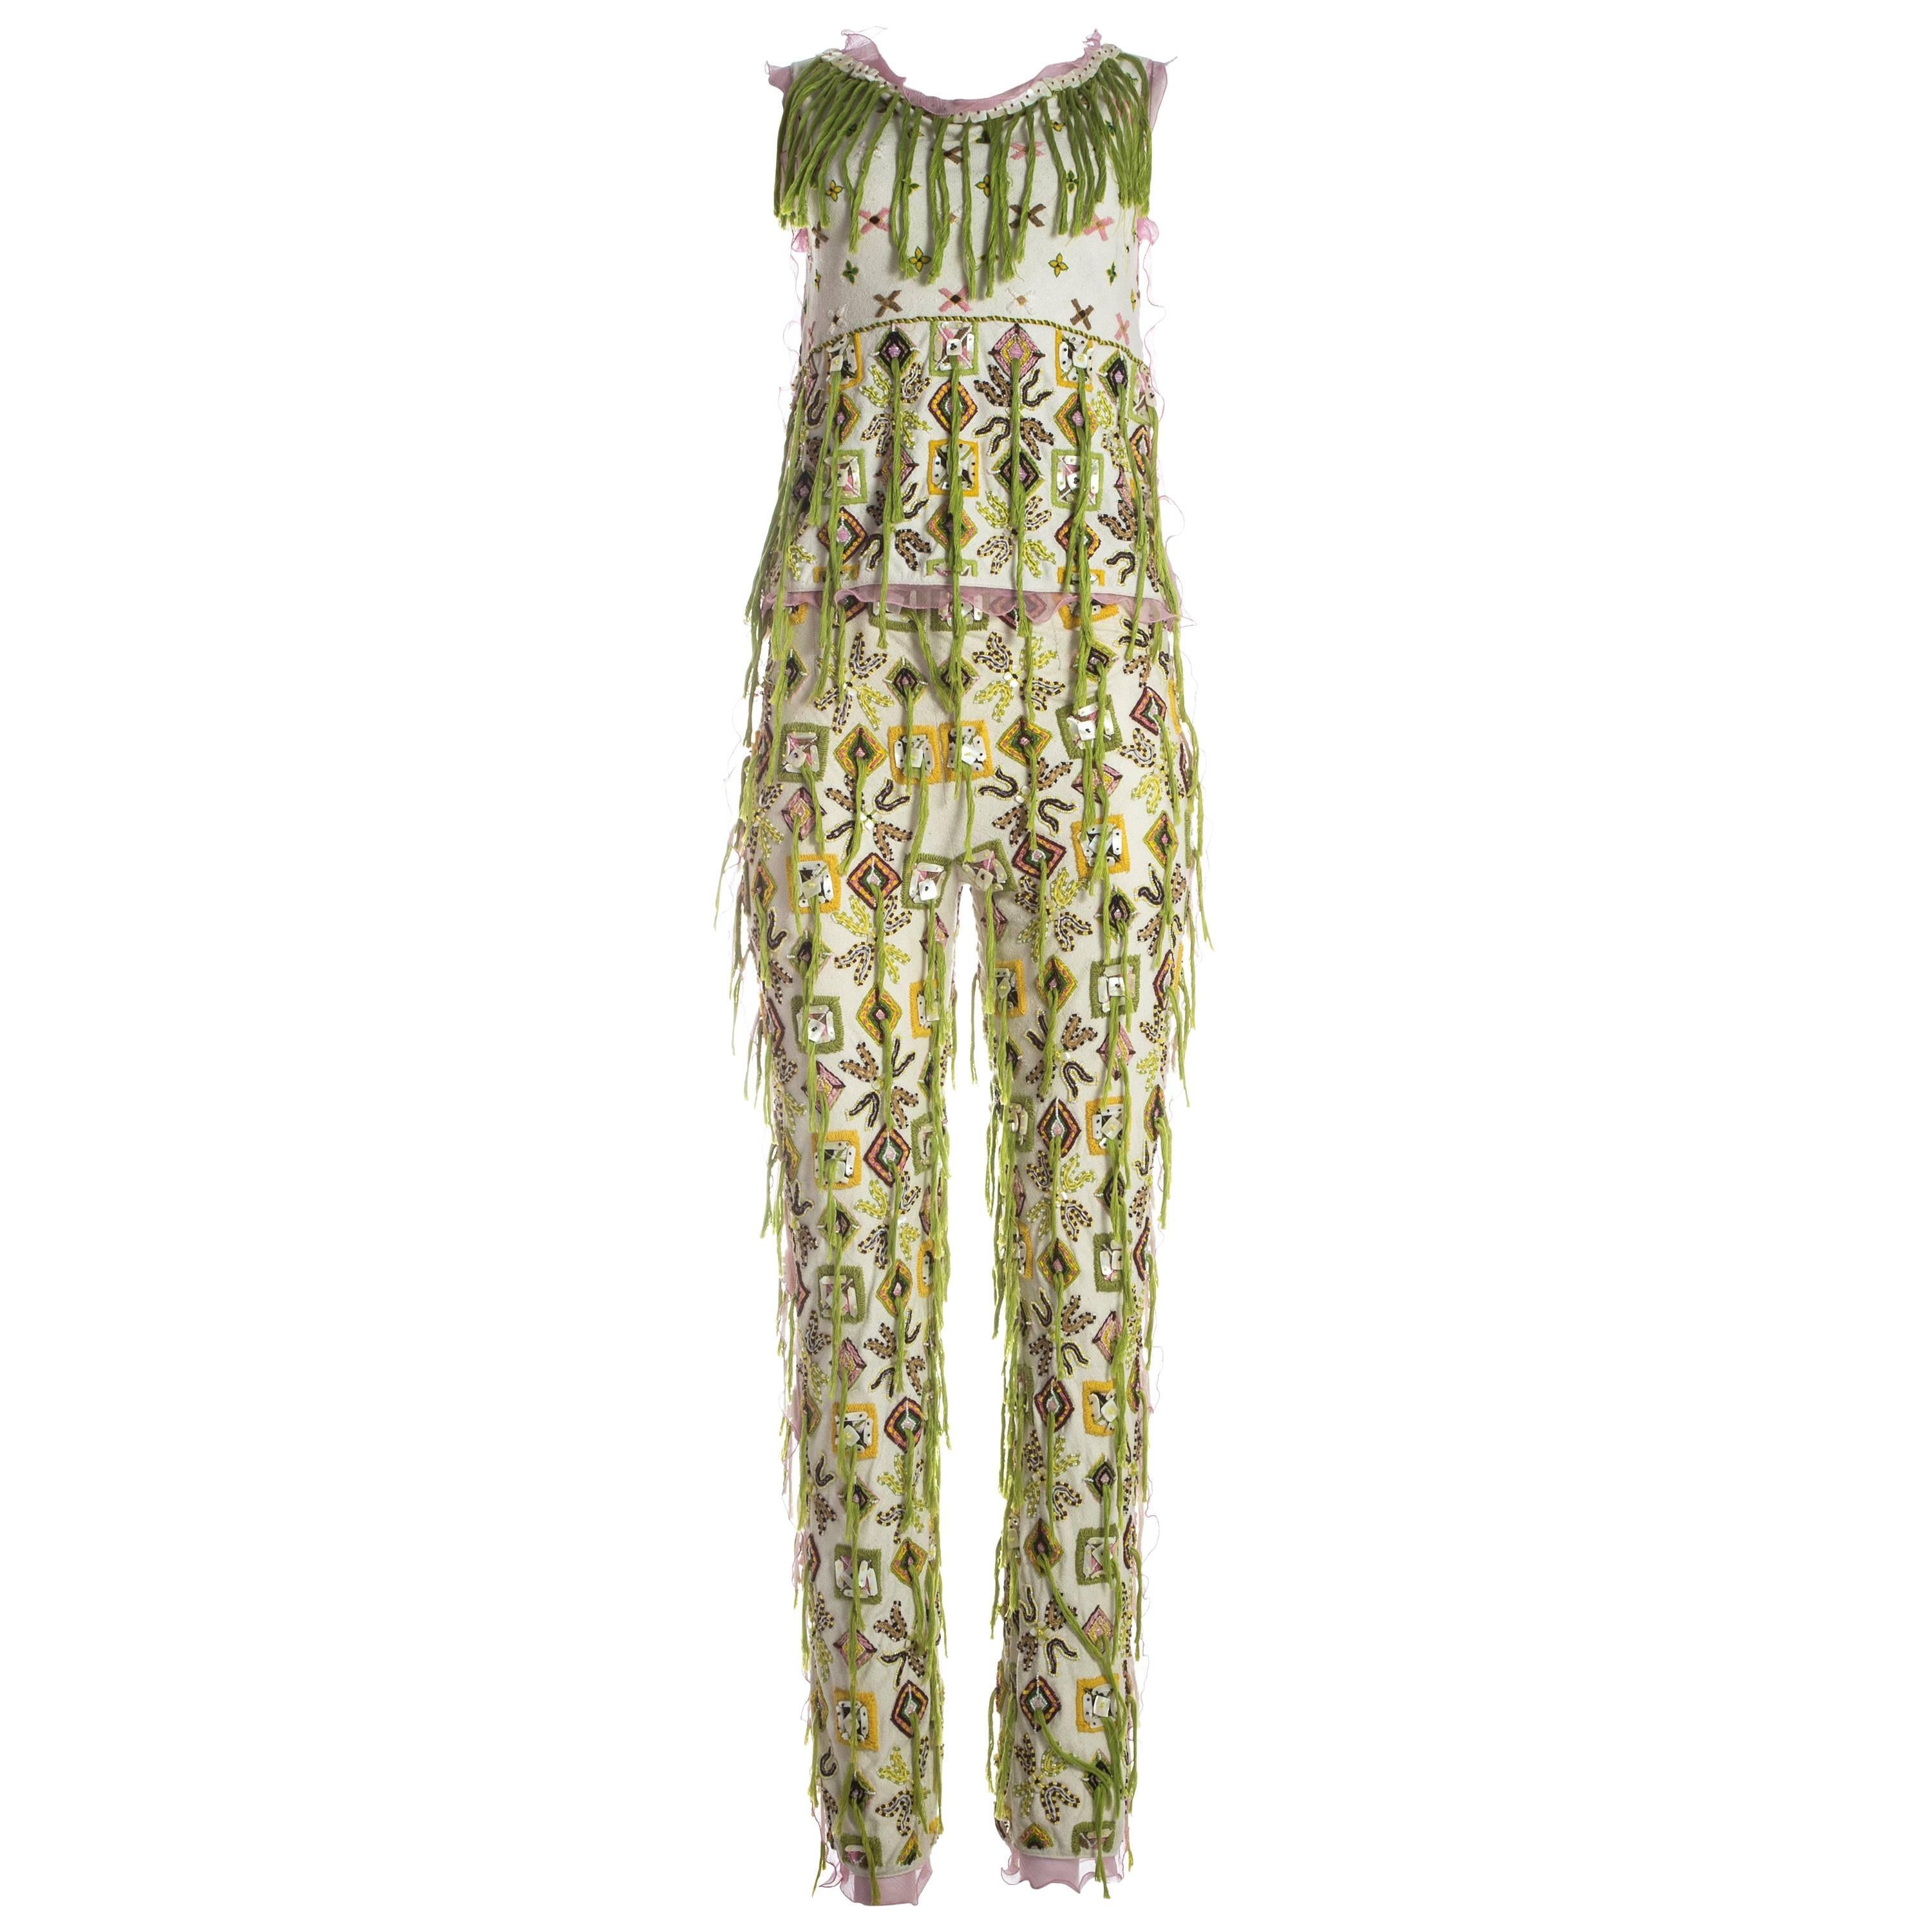 Fendi embroidered cotton pant suit fringed with silk thread, S / S 2000